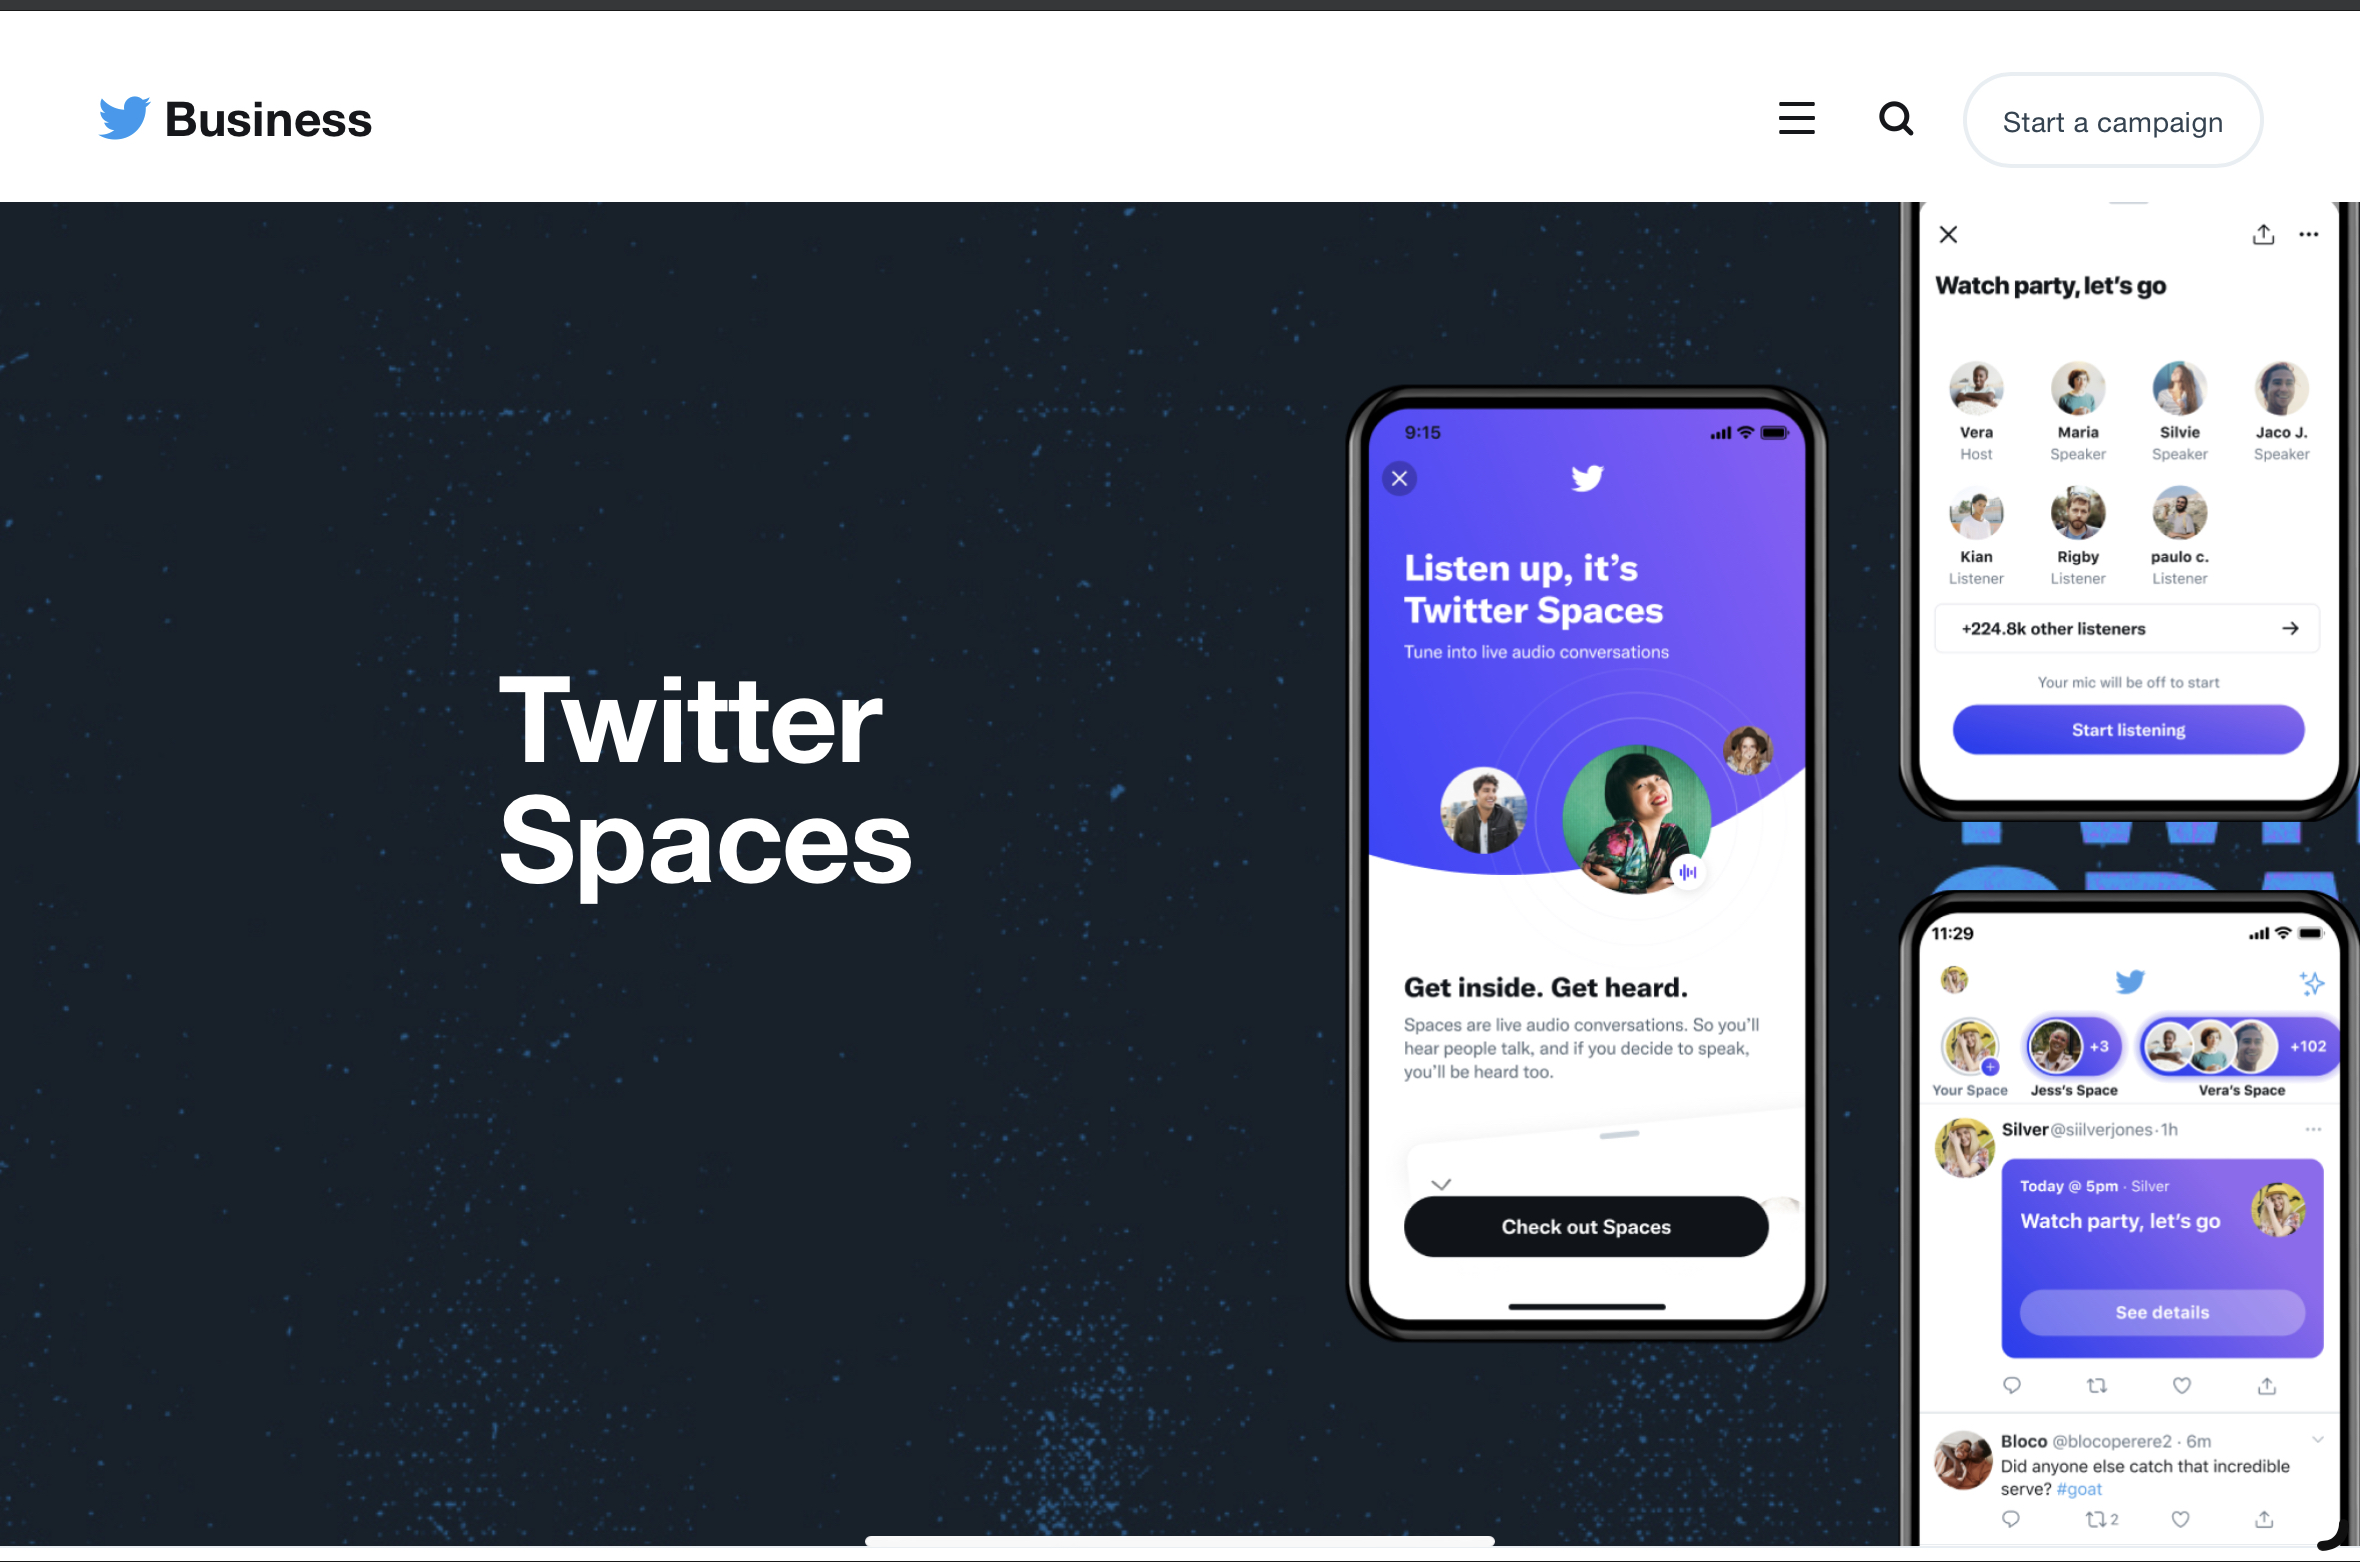 The landing page of Twitter Spaces on the Twitter website.